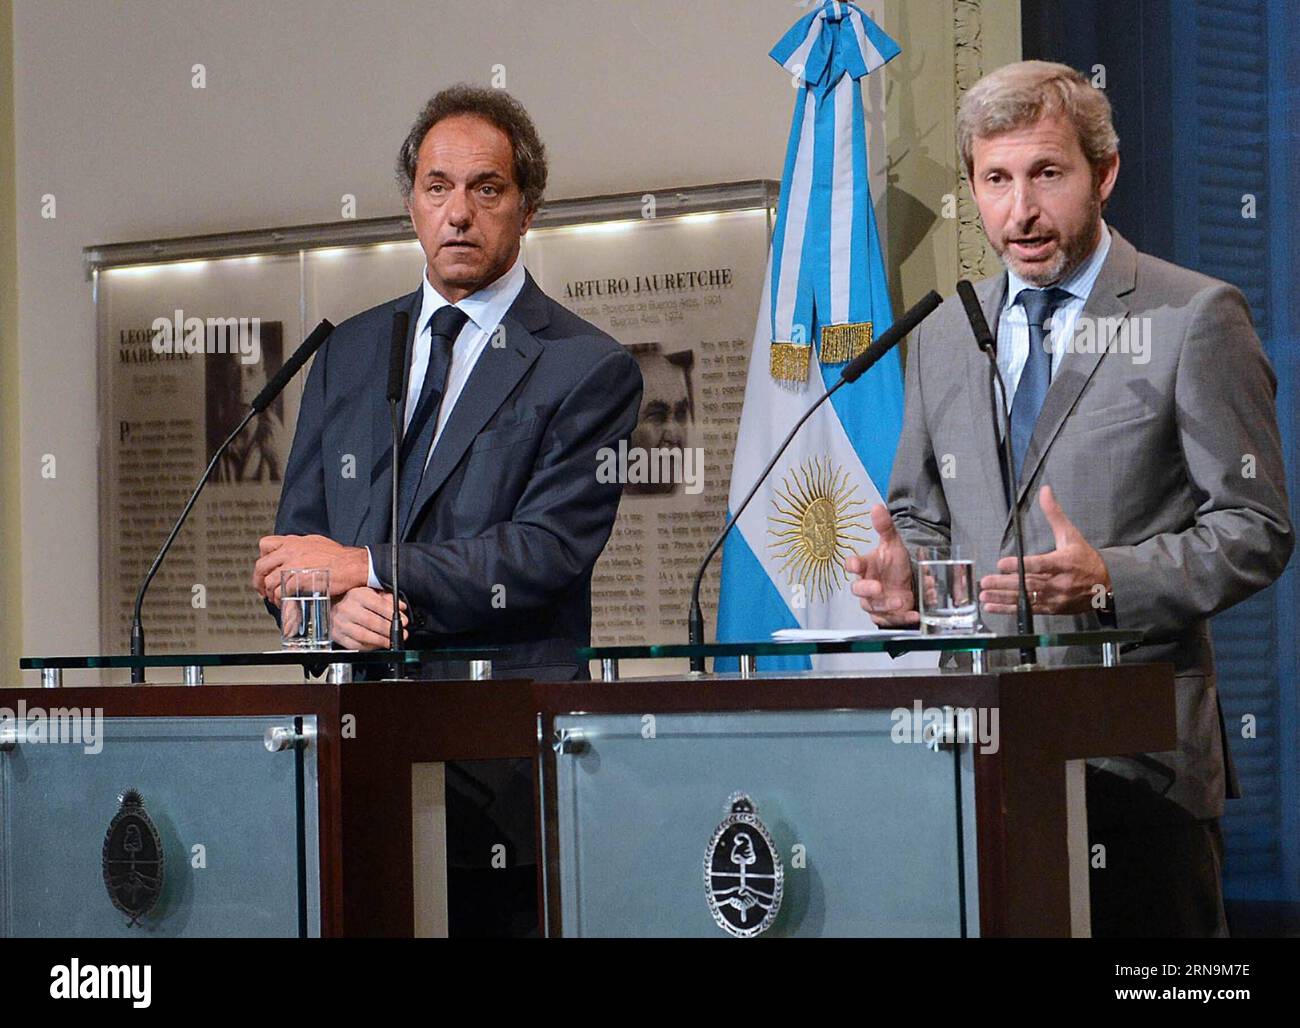 (151211) -- BUENOS AIRES, Dec. 11, 2015 -- Argentina s Interior, Public Works and Housing Minister Rogelio Frigerio (R) and former presidential candidate Daniel Scioli take part in a press conference after their meeting with Argentina s President Mauricio Macri at Casa Rosada in Buenos Aires, capital of Argentina, Dec. 11, 2015. Presidency/TELAM) (jg) (fnc) ARGENTINA-BUENOS AIRES-POLITICS-MACRI e TELAM PUBLICATIONxNOTxINxCHN   151211 Buenos Aires DEC 11 2015 Argentina S Interior Public Works and Housing Ministers Rogelio Frigerio r and Former Presidential Candidate Daniel Scioli Take Part in a Stock Photo